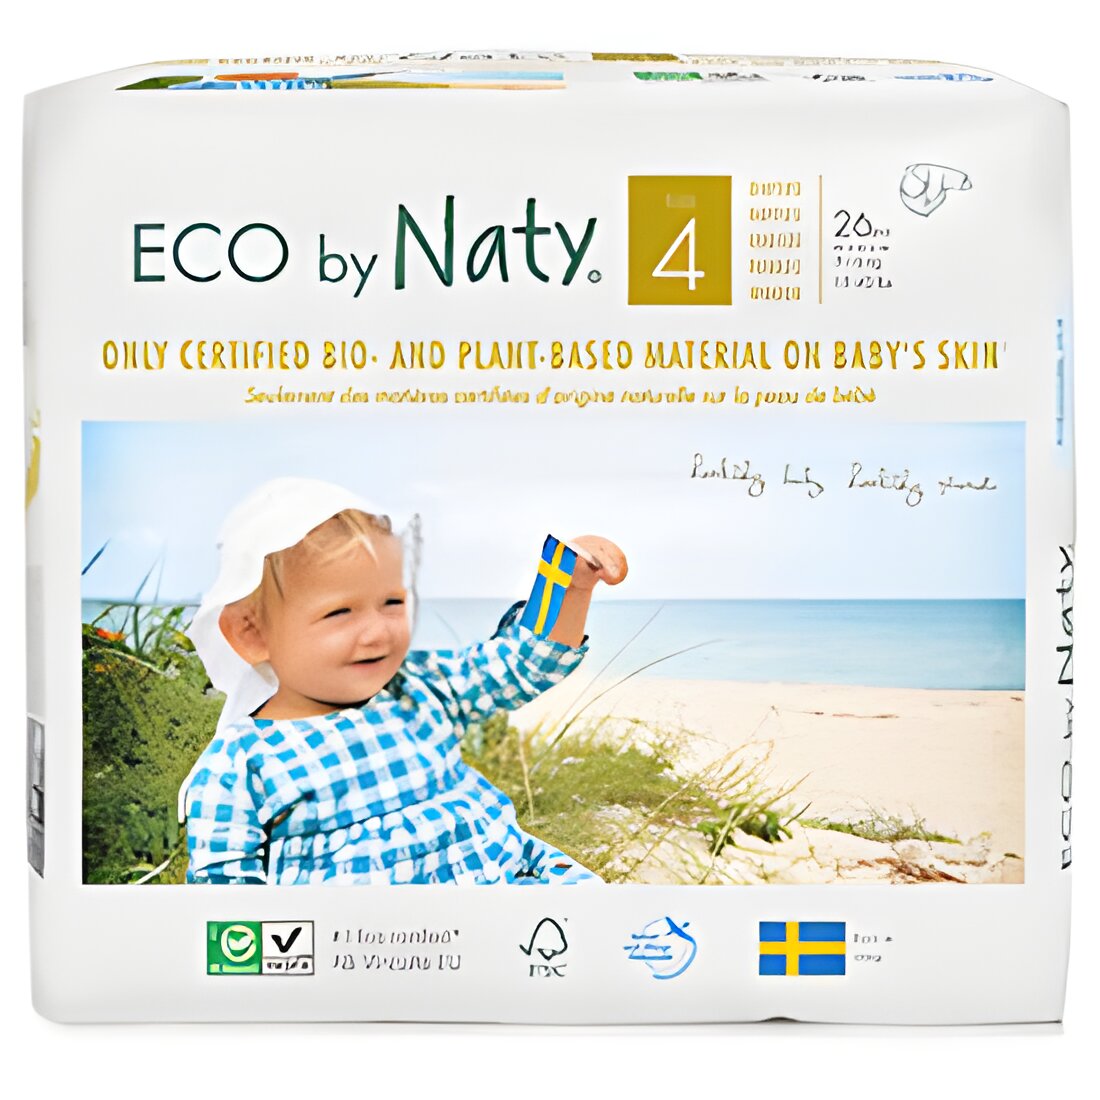 Free Eco Diaper Trial Box From Naty